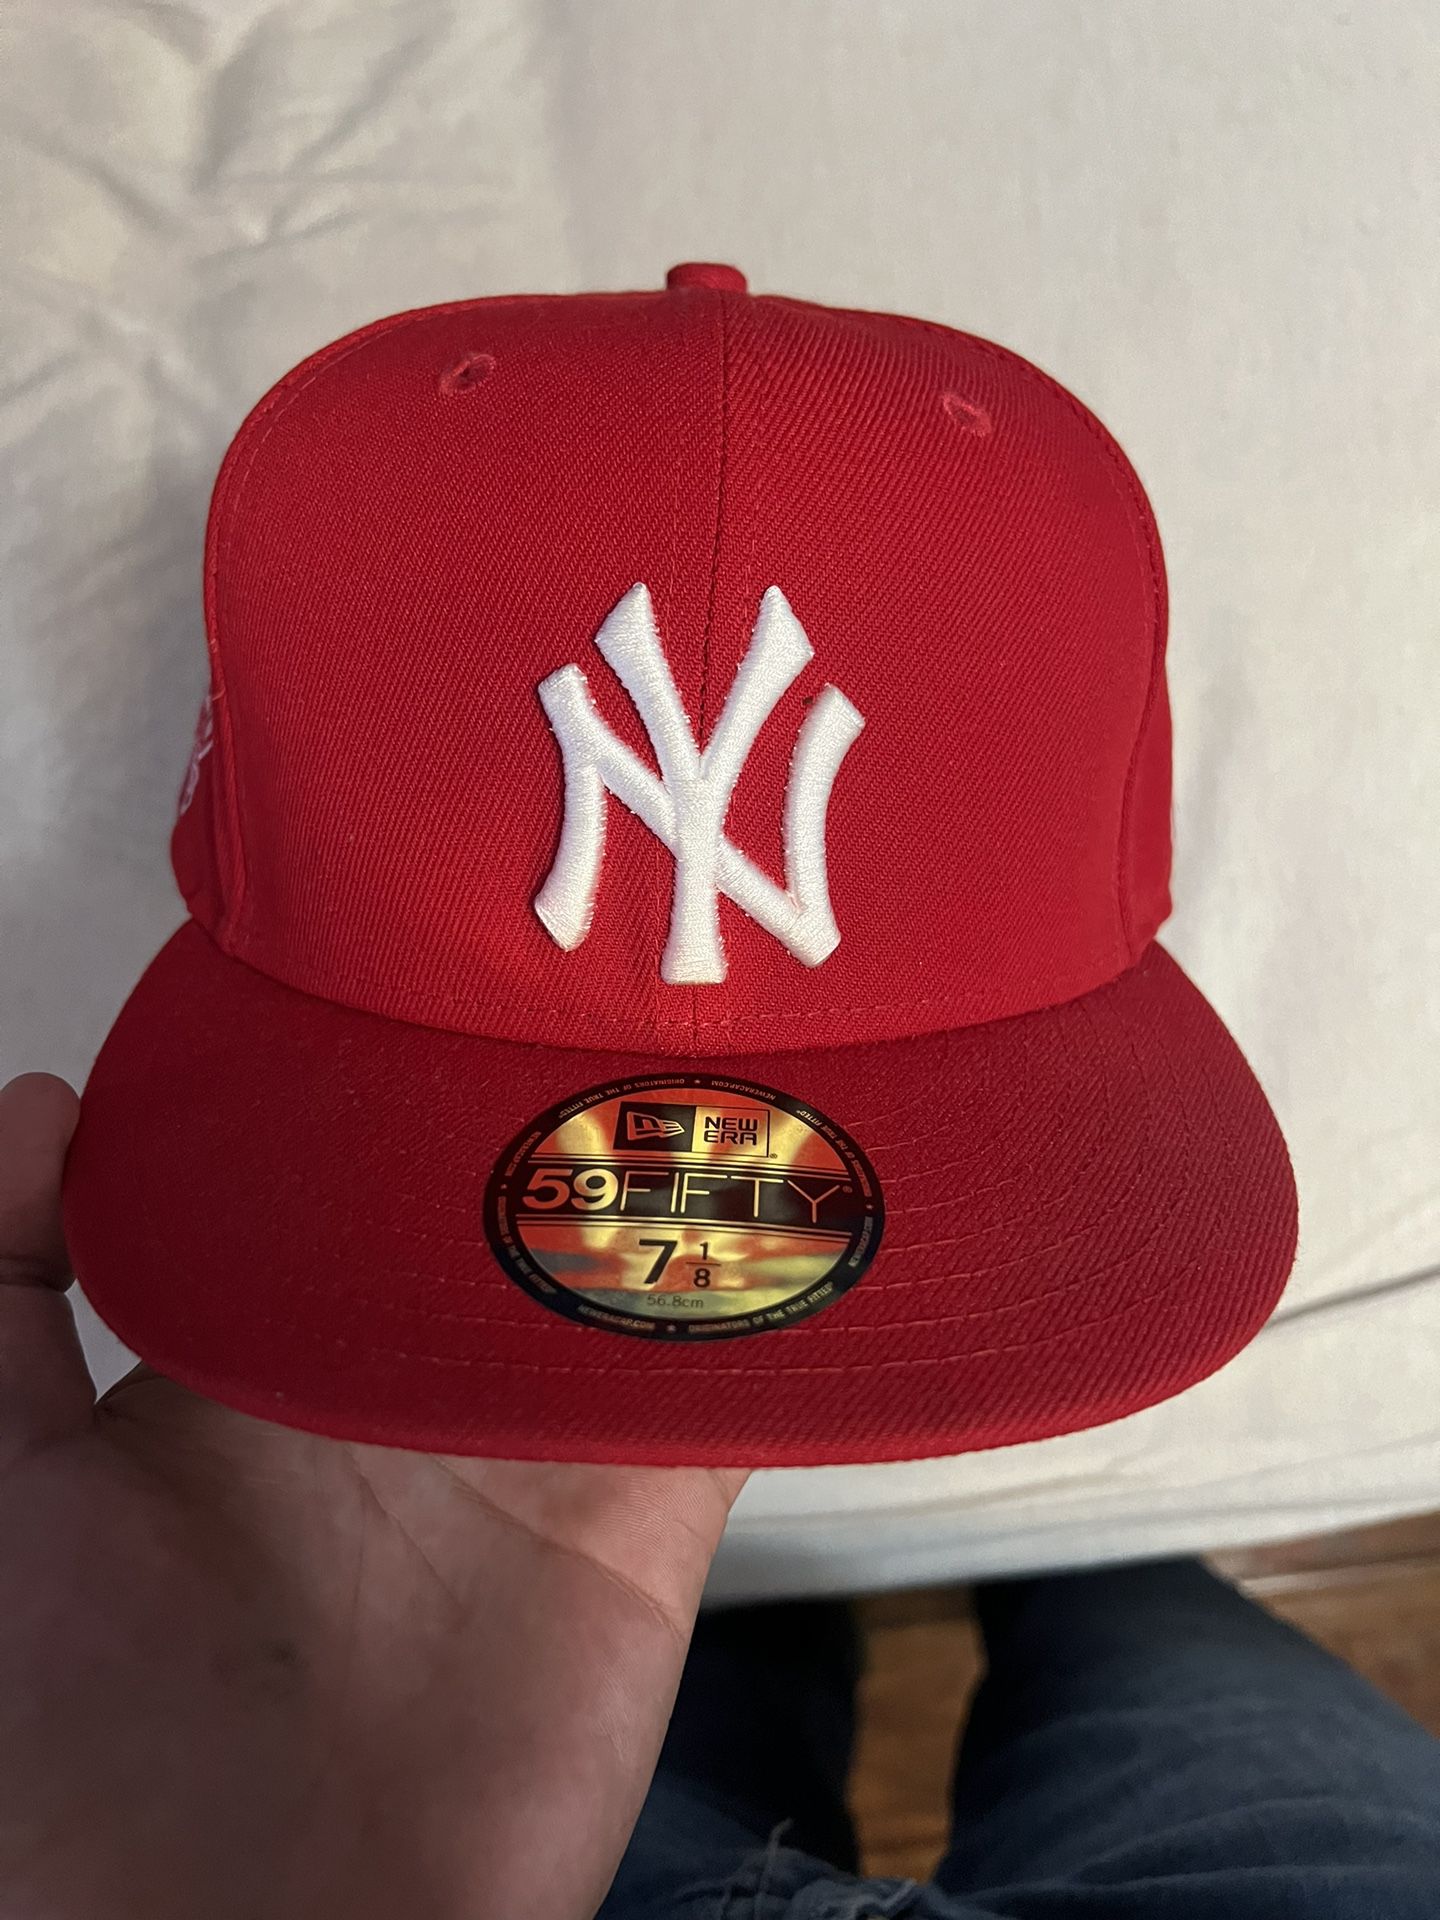 New York Yankees Fitted